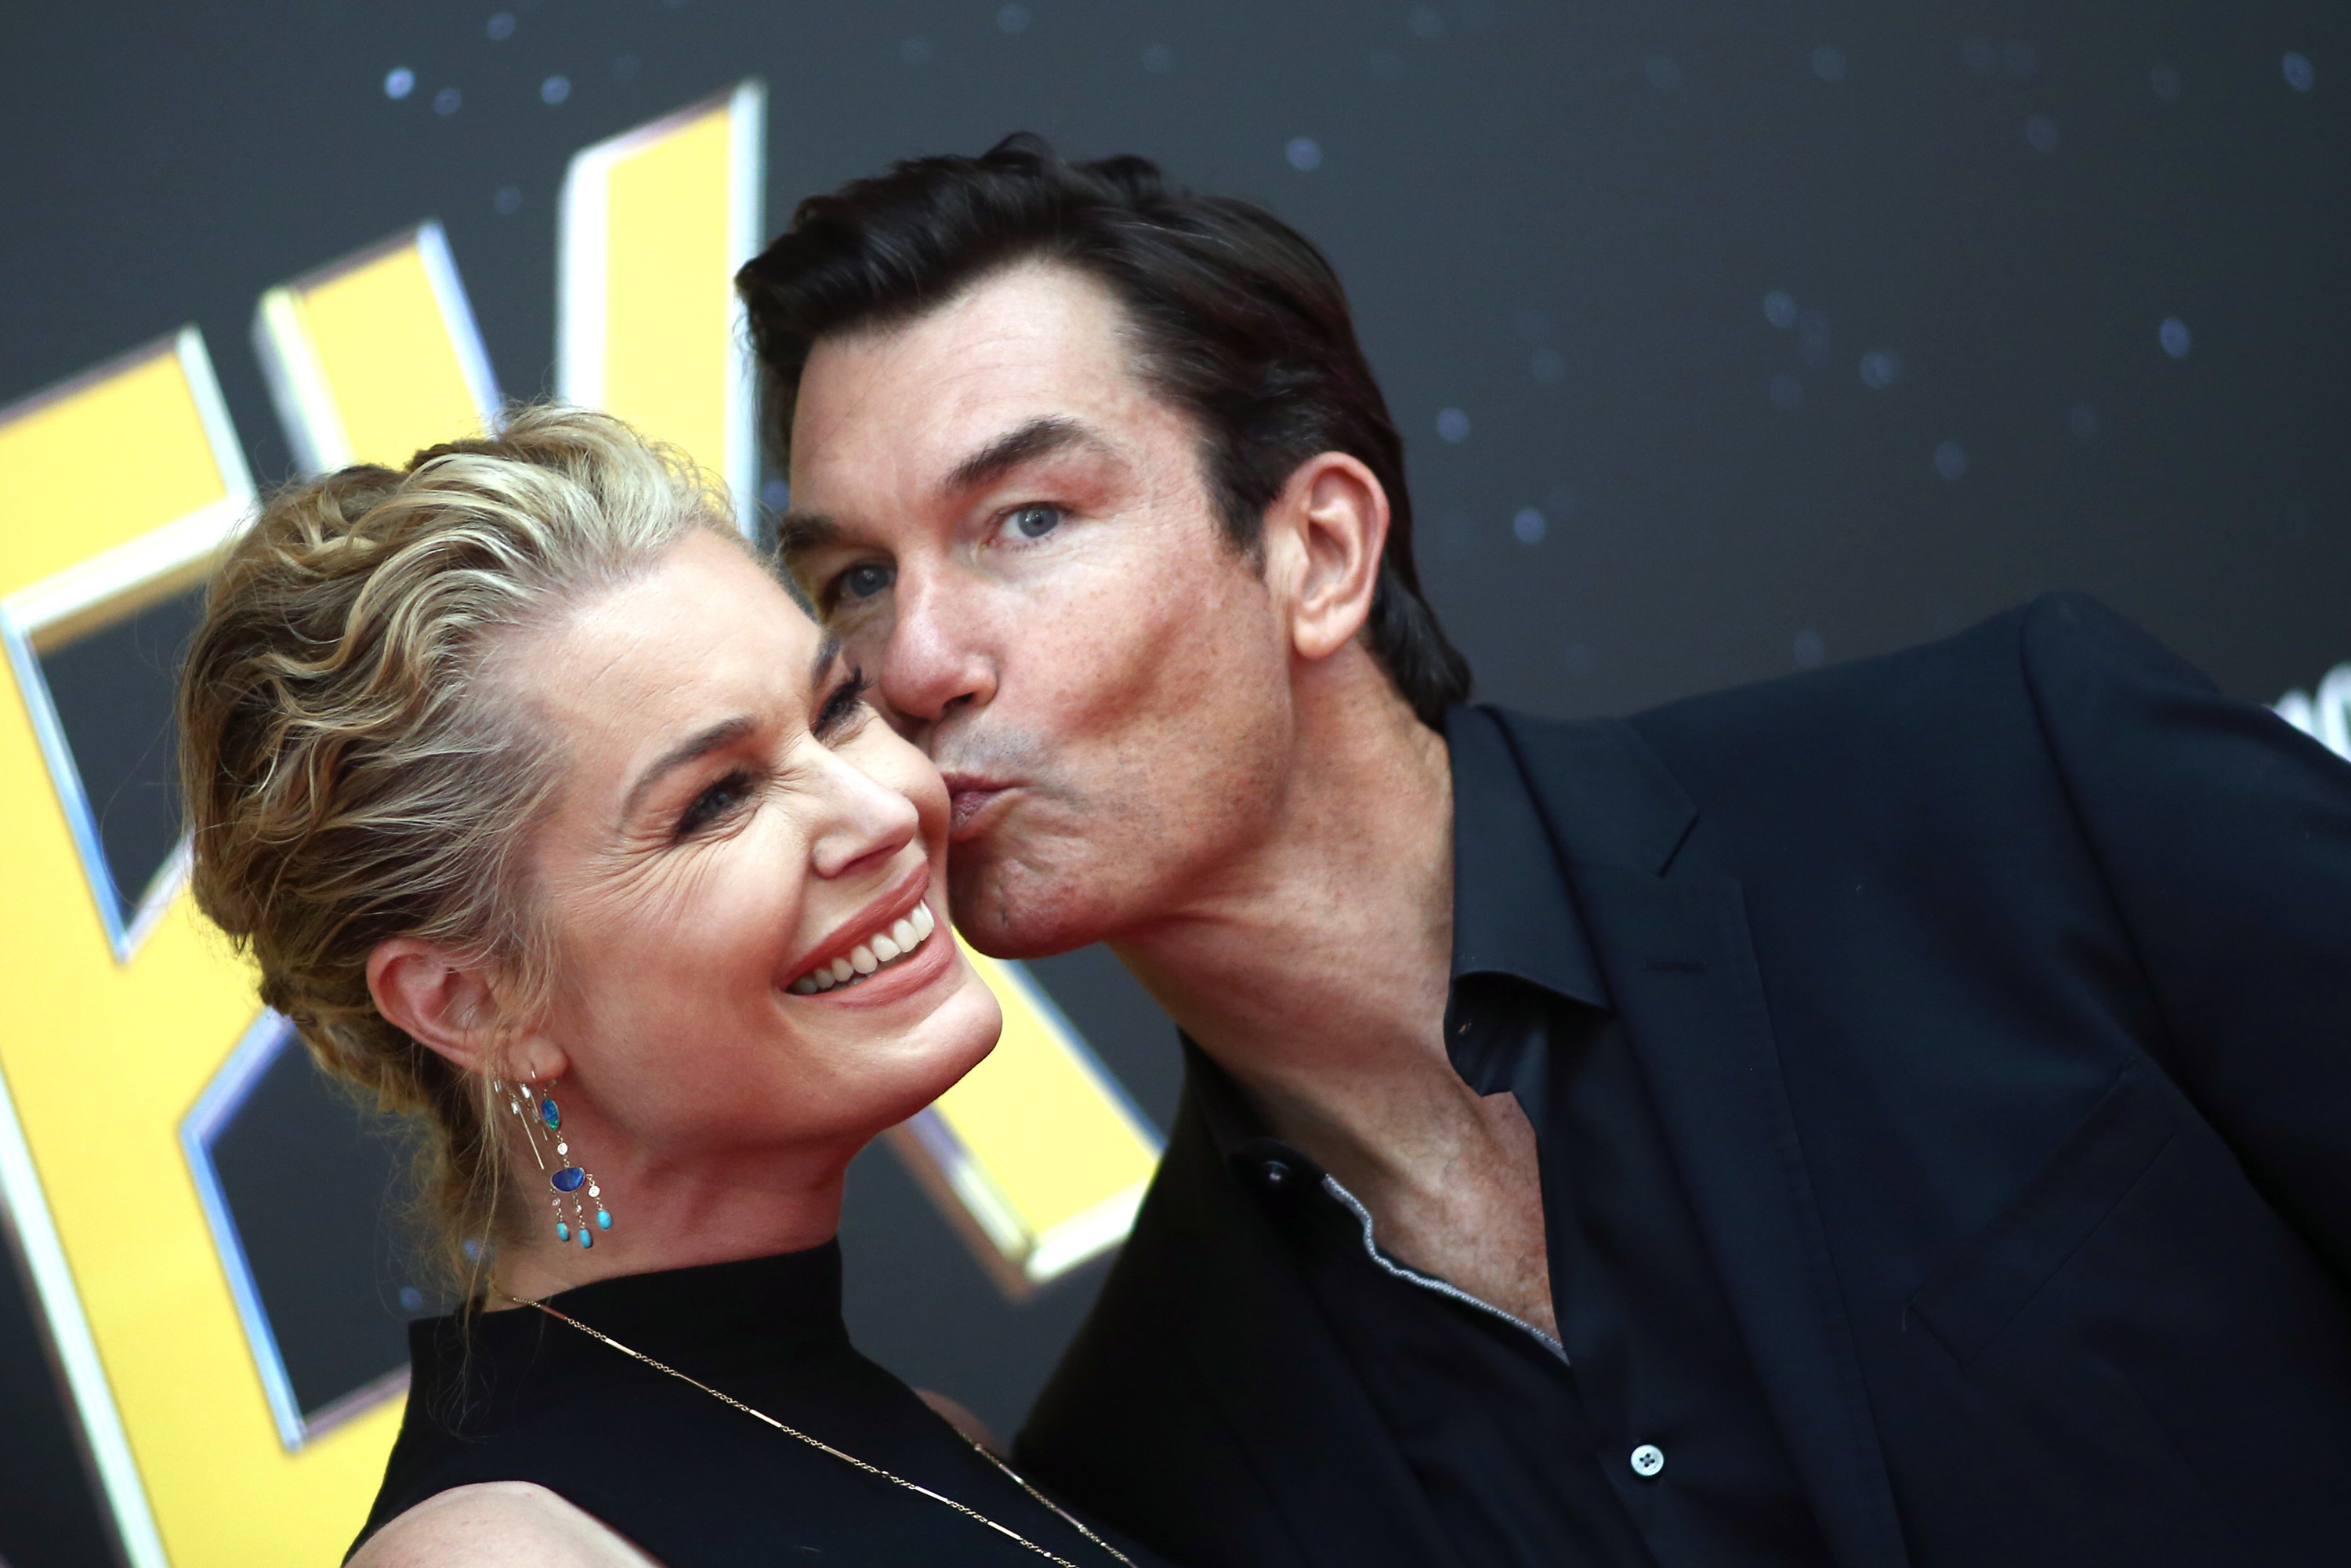 Rebecca Romijn smiles while Jerry O&#x27;Connell kisses her cheek at an event